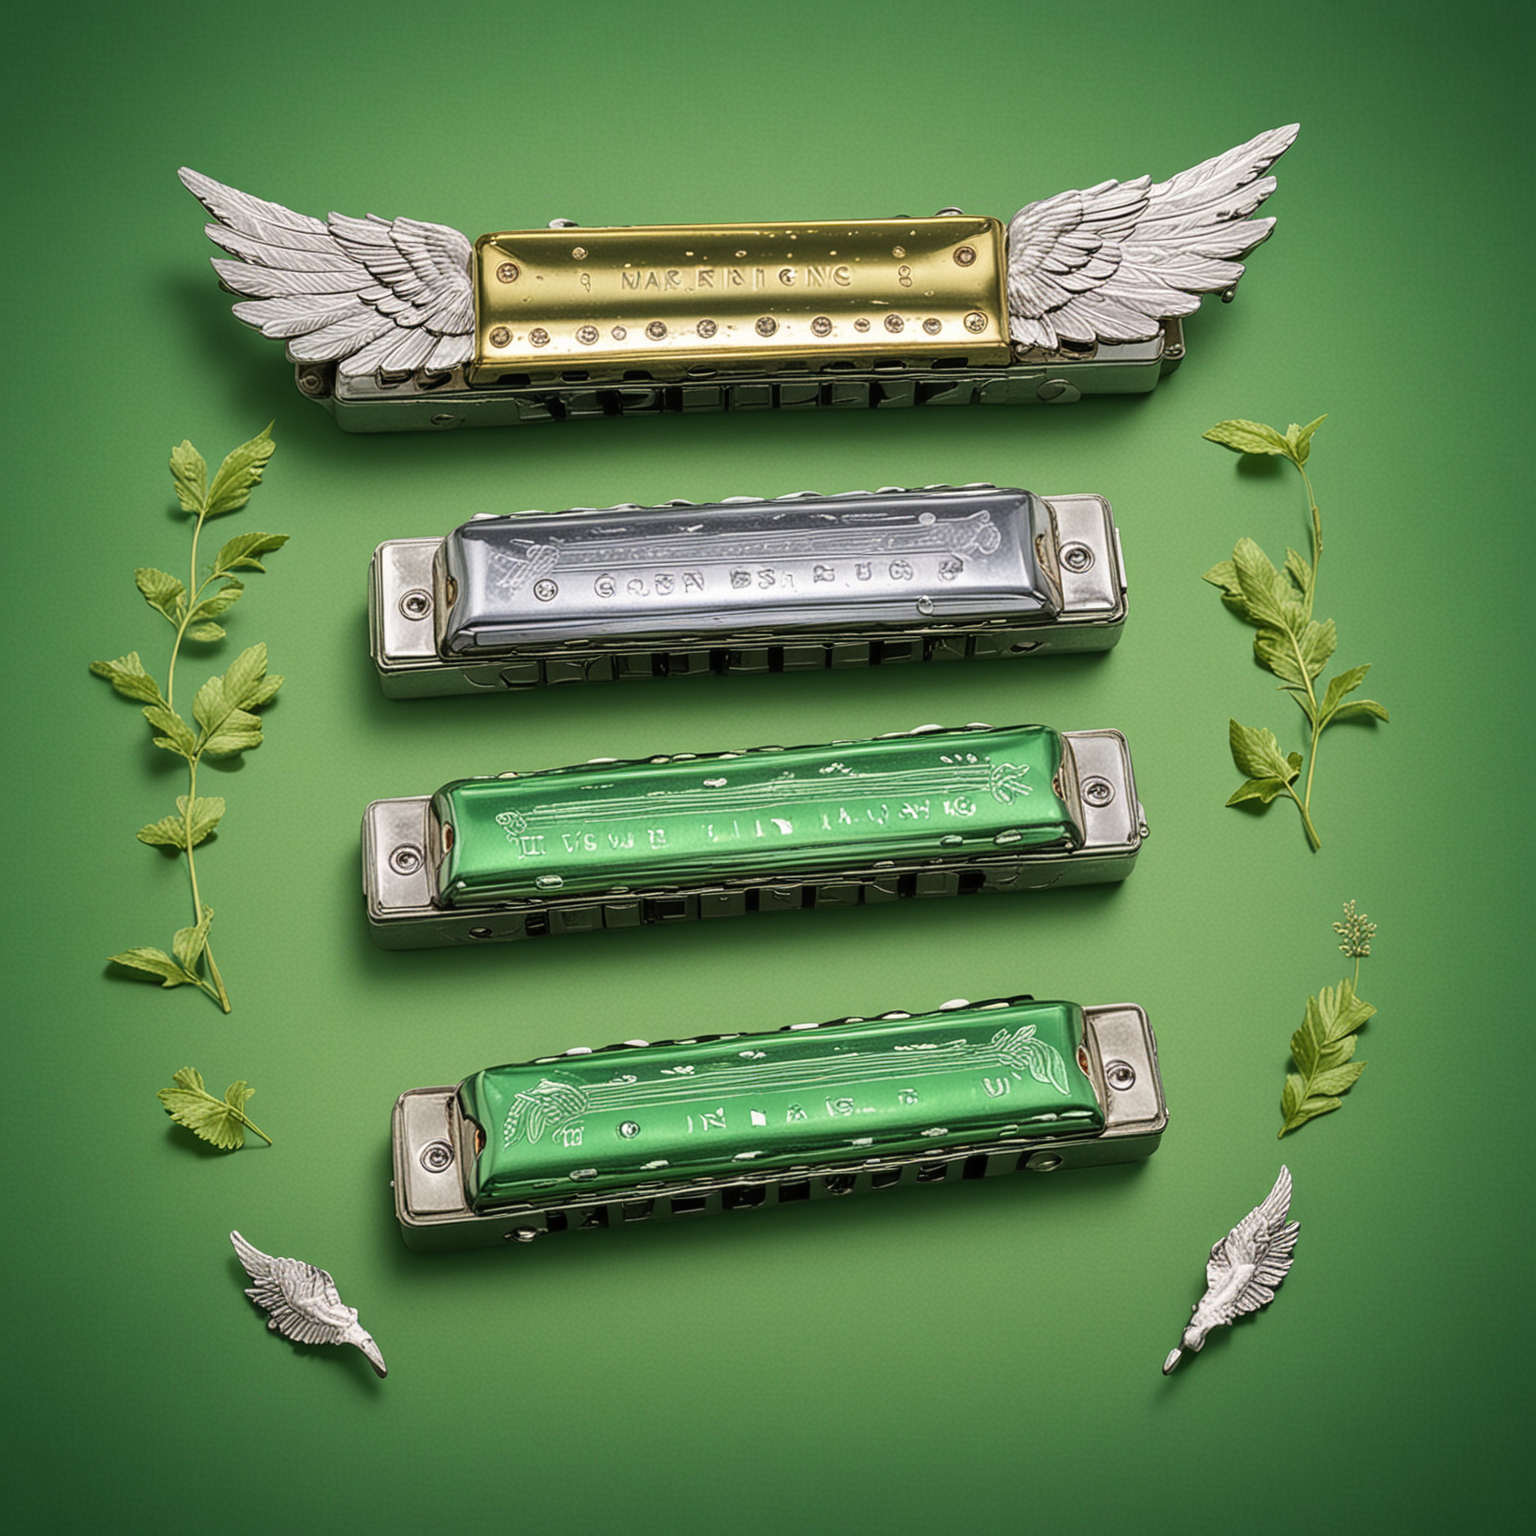 harmonicas with wings against a green background
